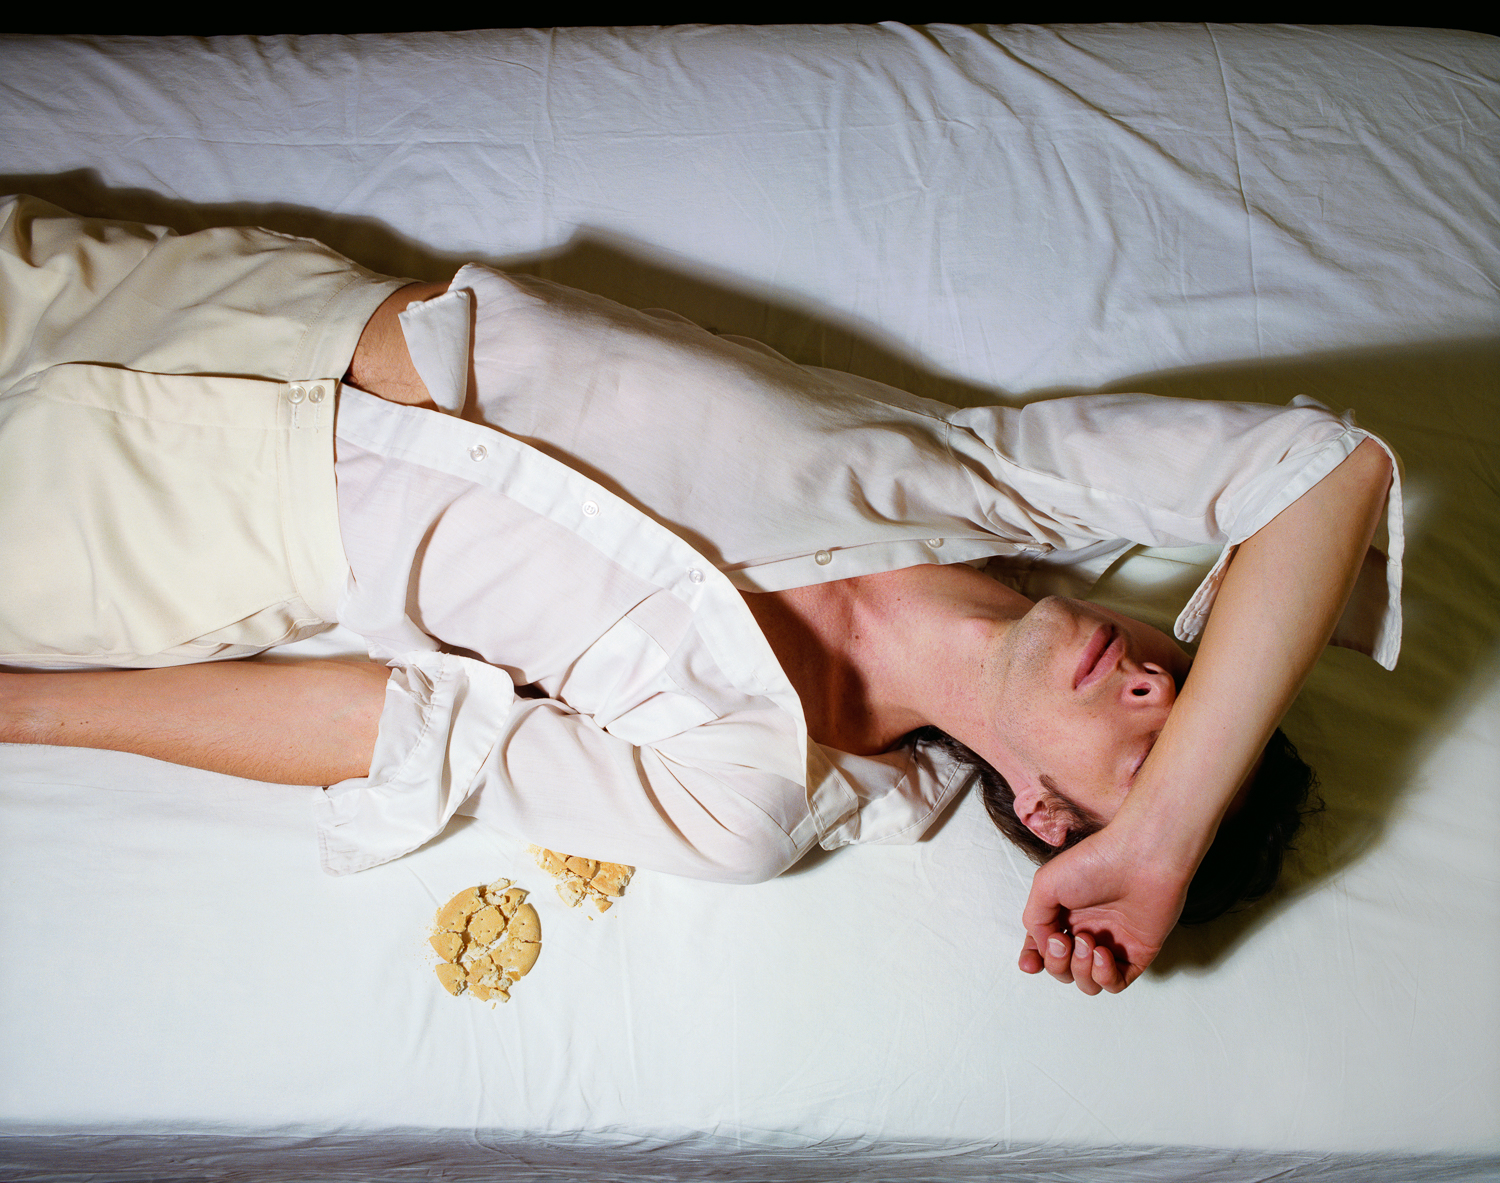 Now and Then © Jo Ann CallisMan on Bed with Crumbs, 1979, Archival Pigment Print, 16 x 20 inches